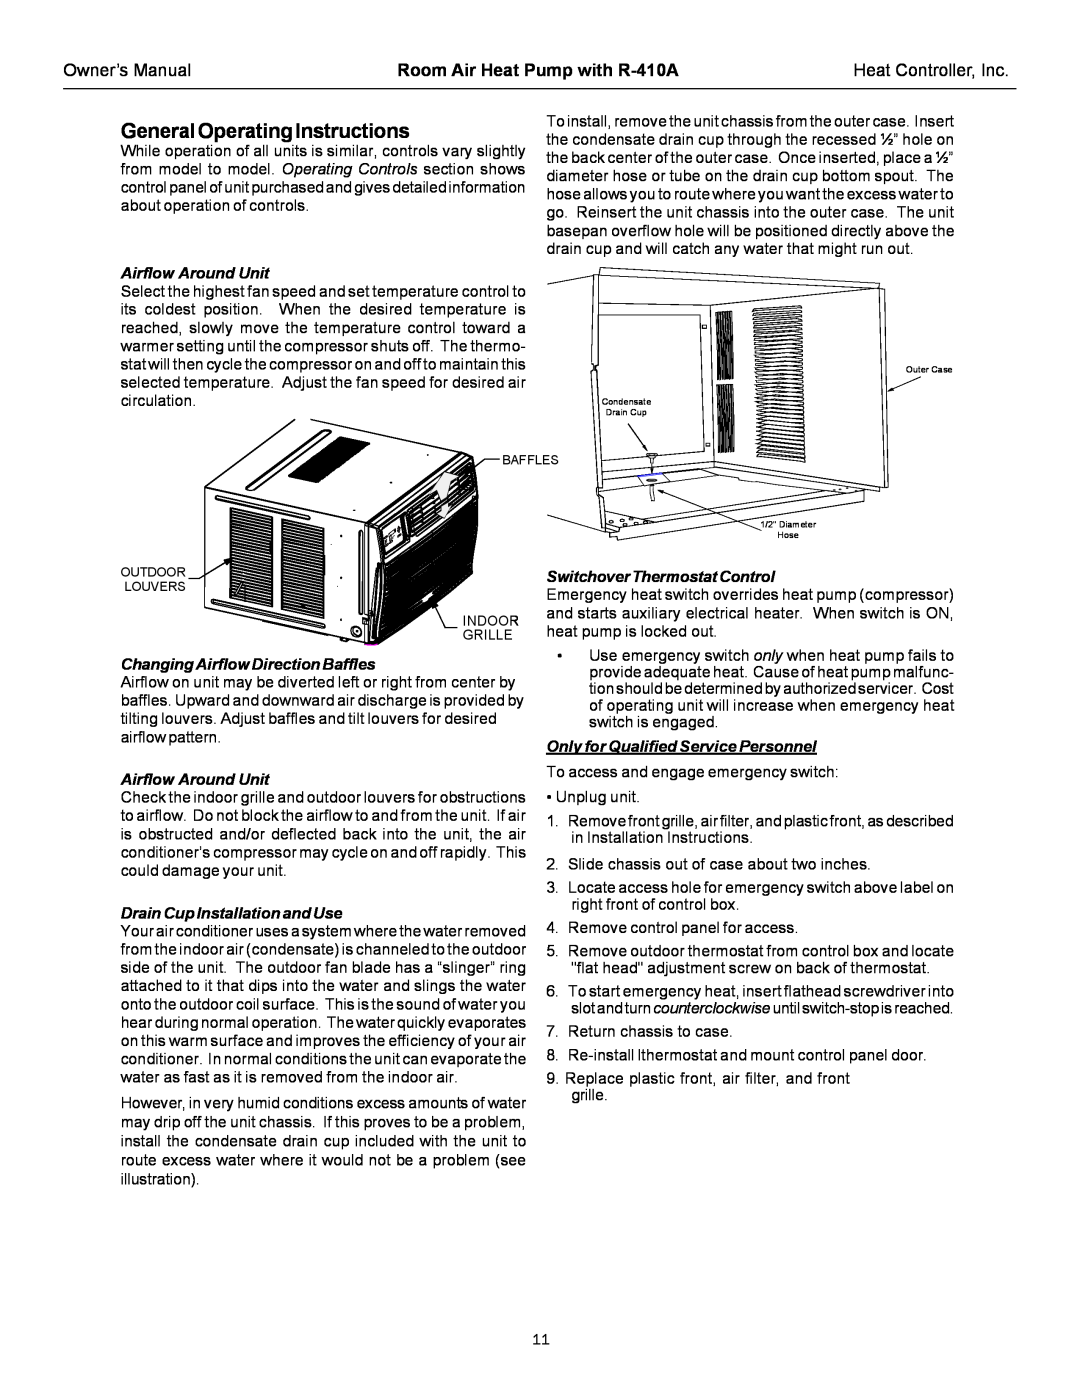 Heat Controller RAH-123G owner manual GeneralOperatingInstructions, Airflow Around Unit, Switchover Thermostat Control 